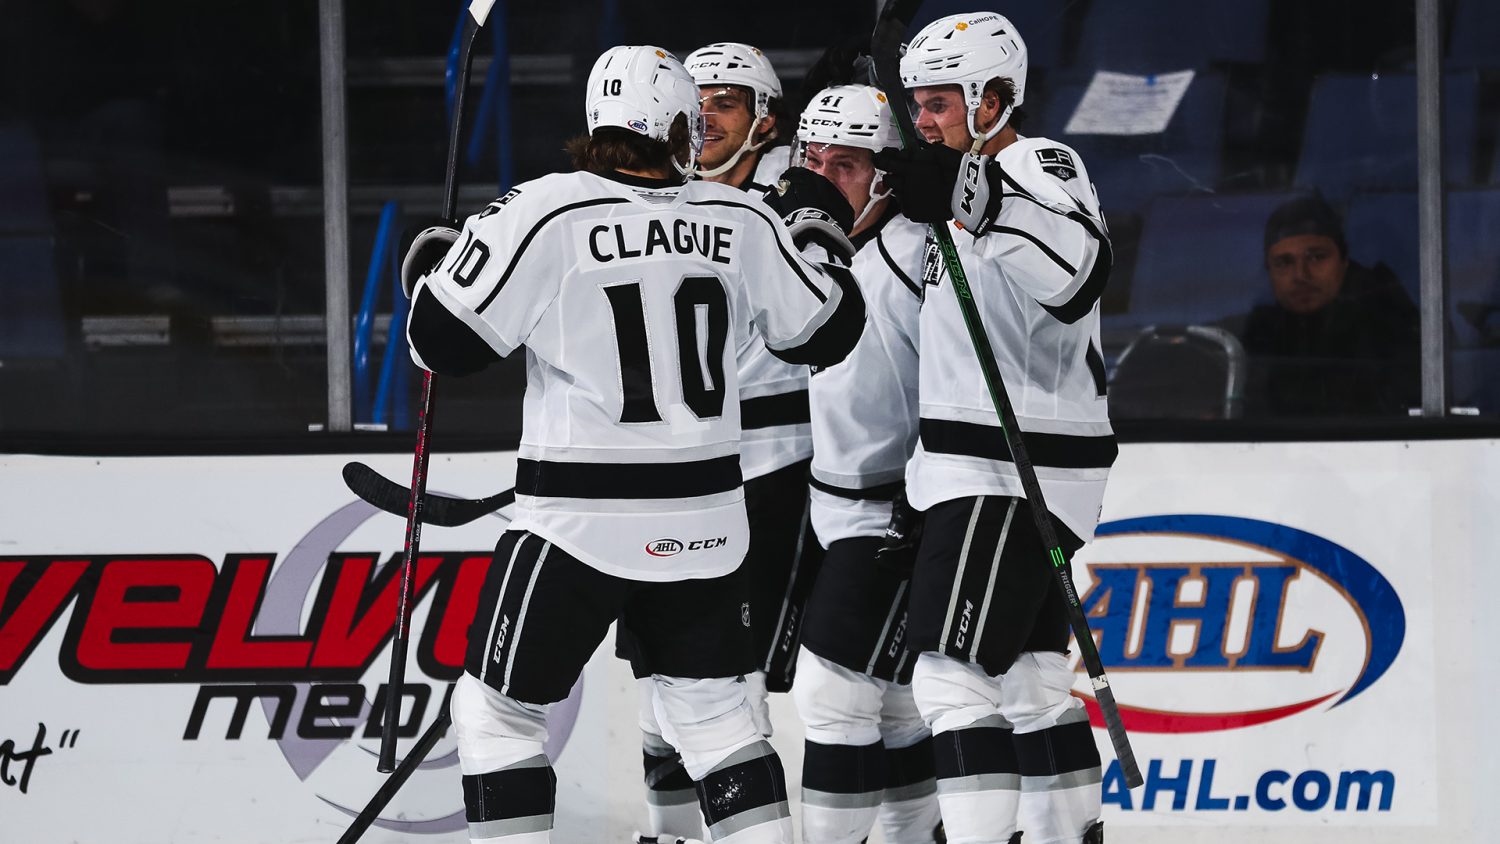 Hot start has Ontario Reign leading division after 5 games